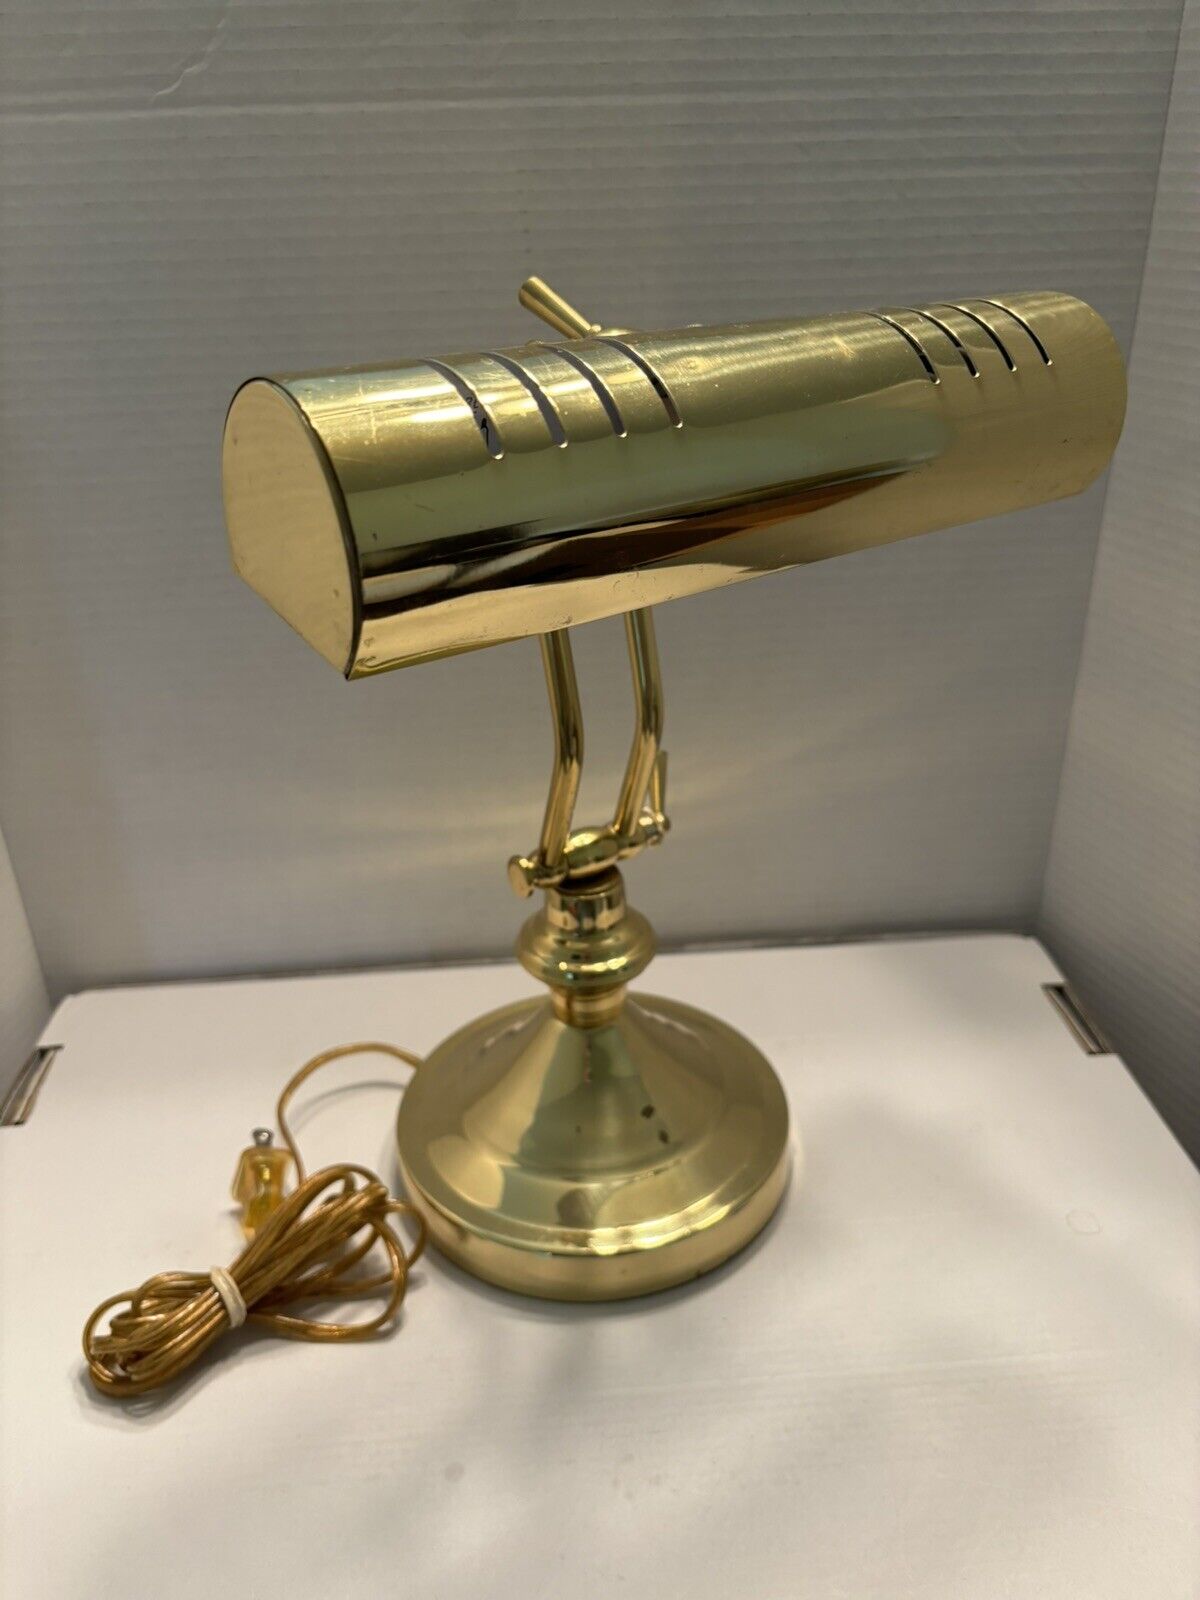 Vintage Bankers Library Piano Desk Lamp Bright Brass Finish Adjustable 13” Tall